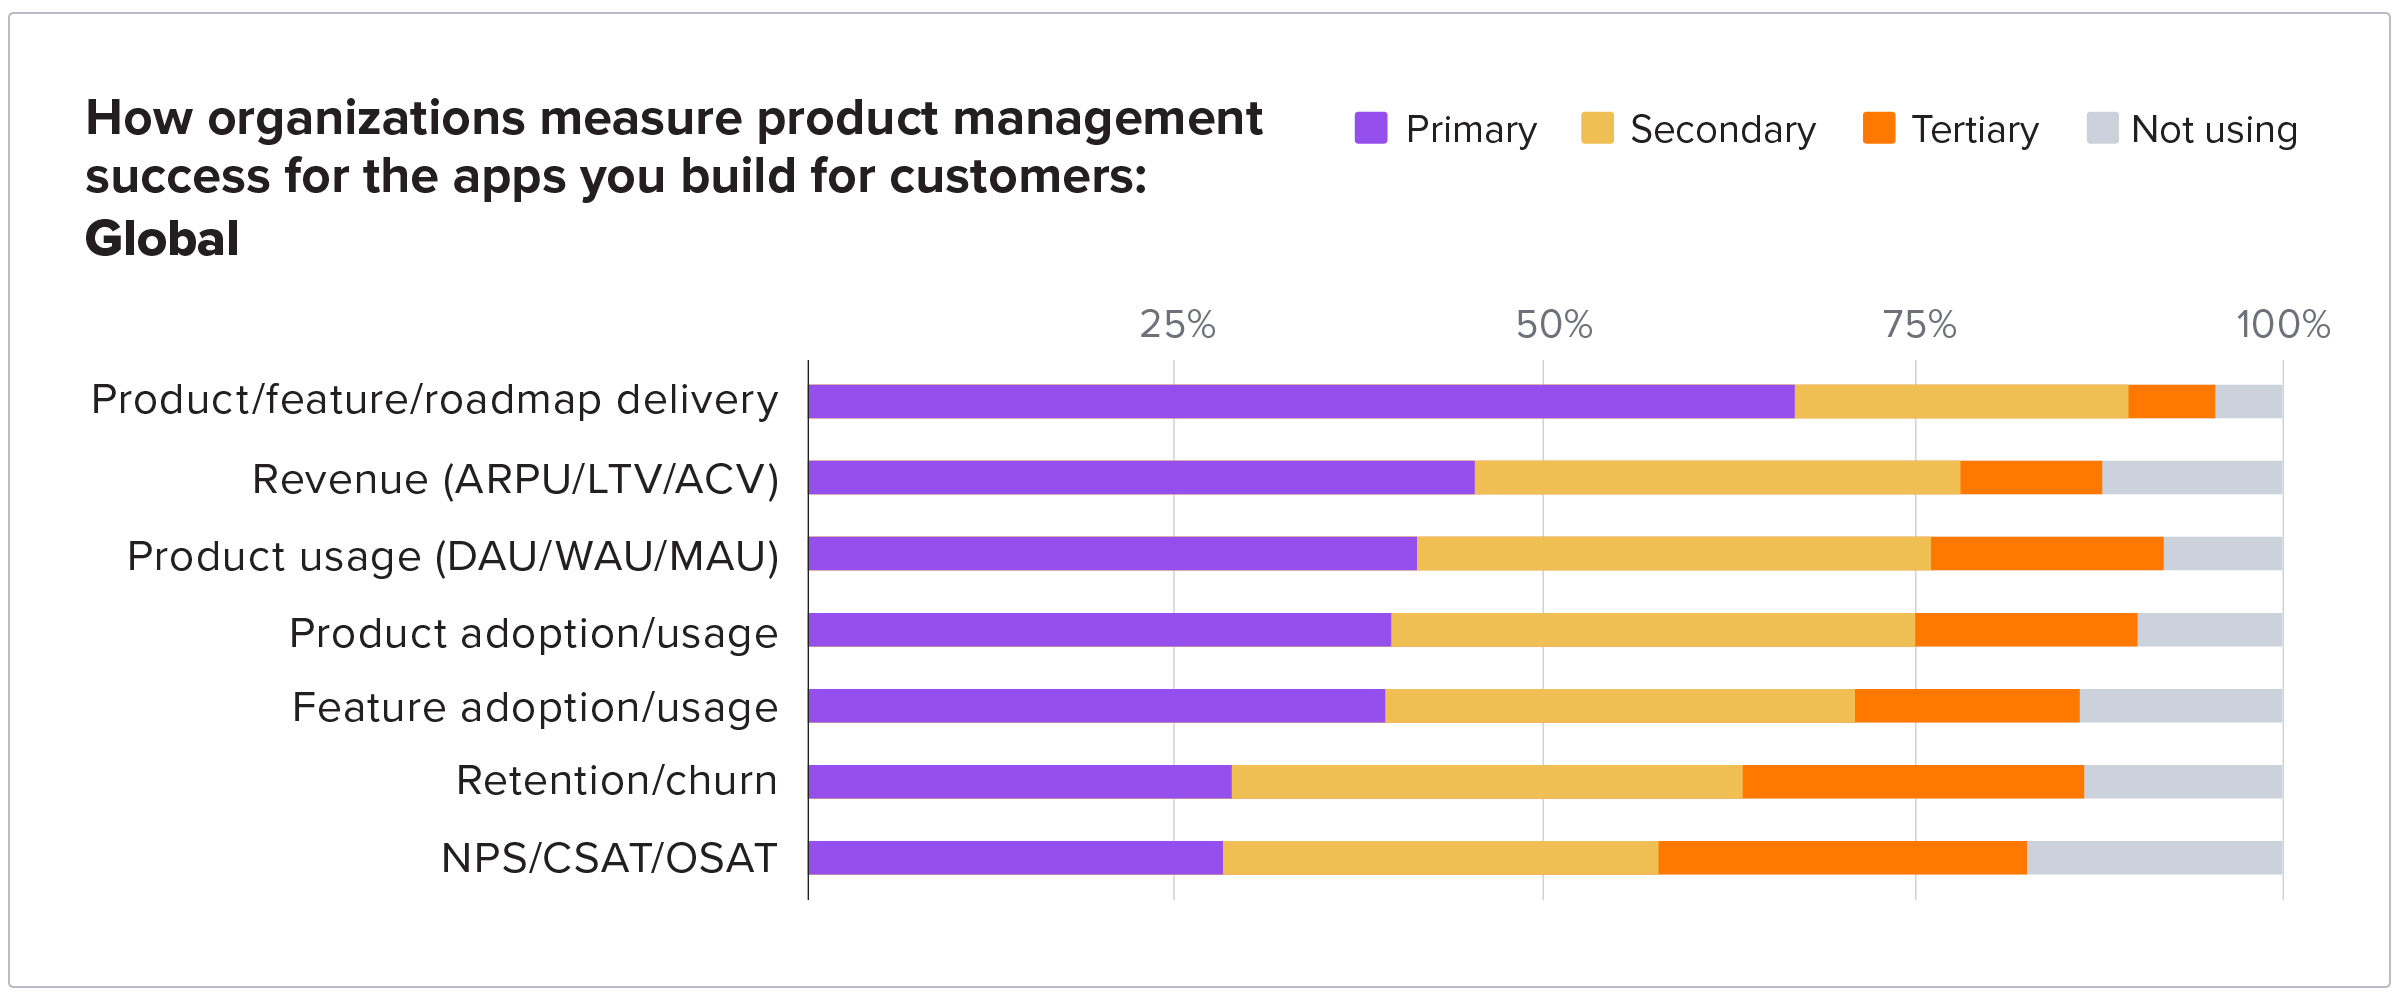 How organisations measure product management success for the apps built for customers: Global